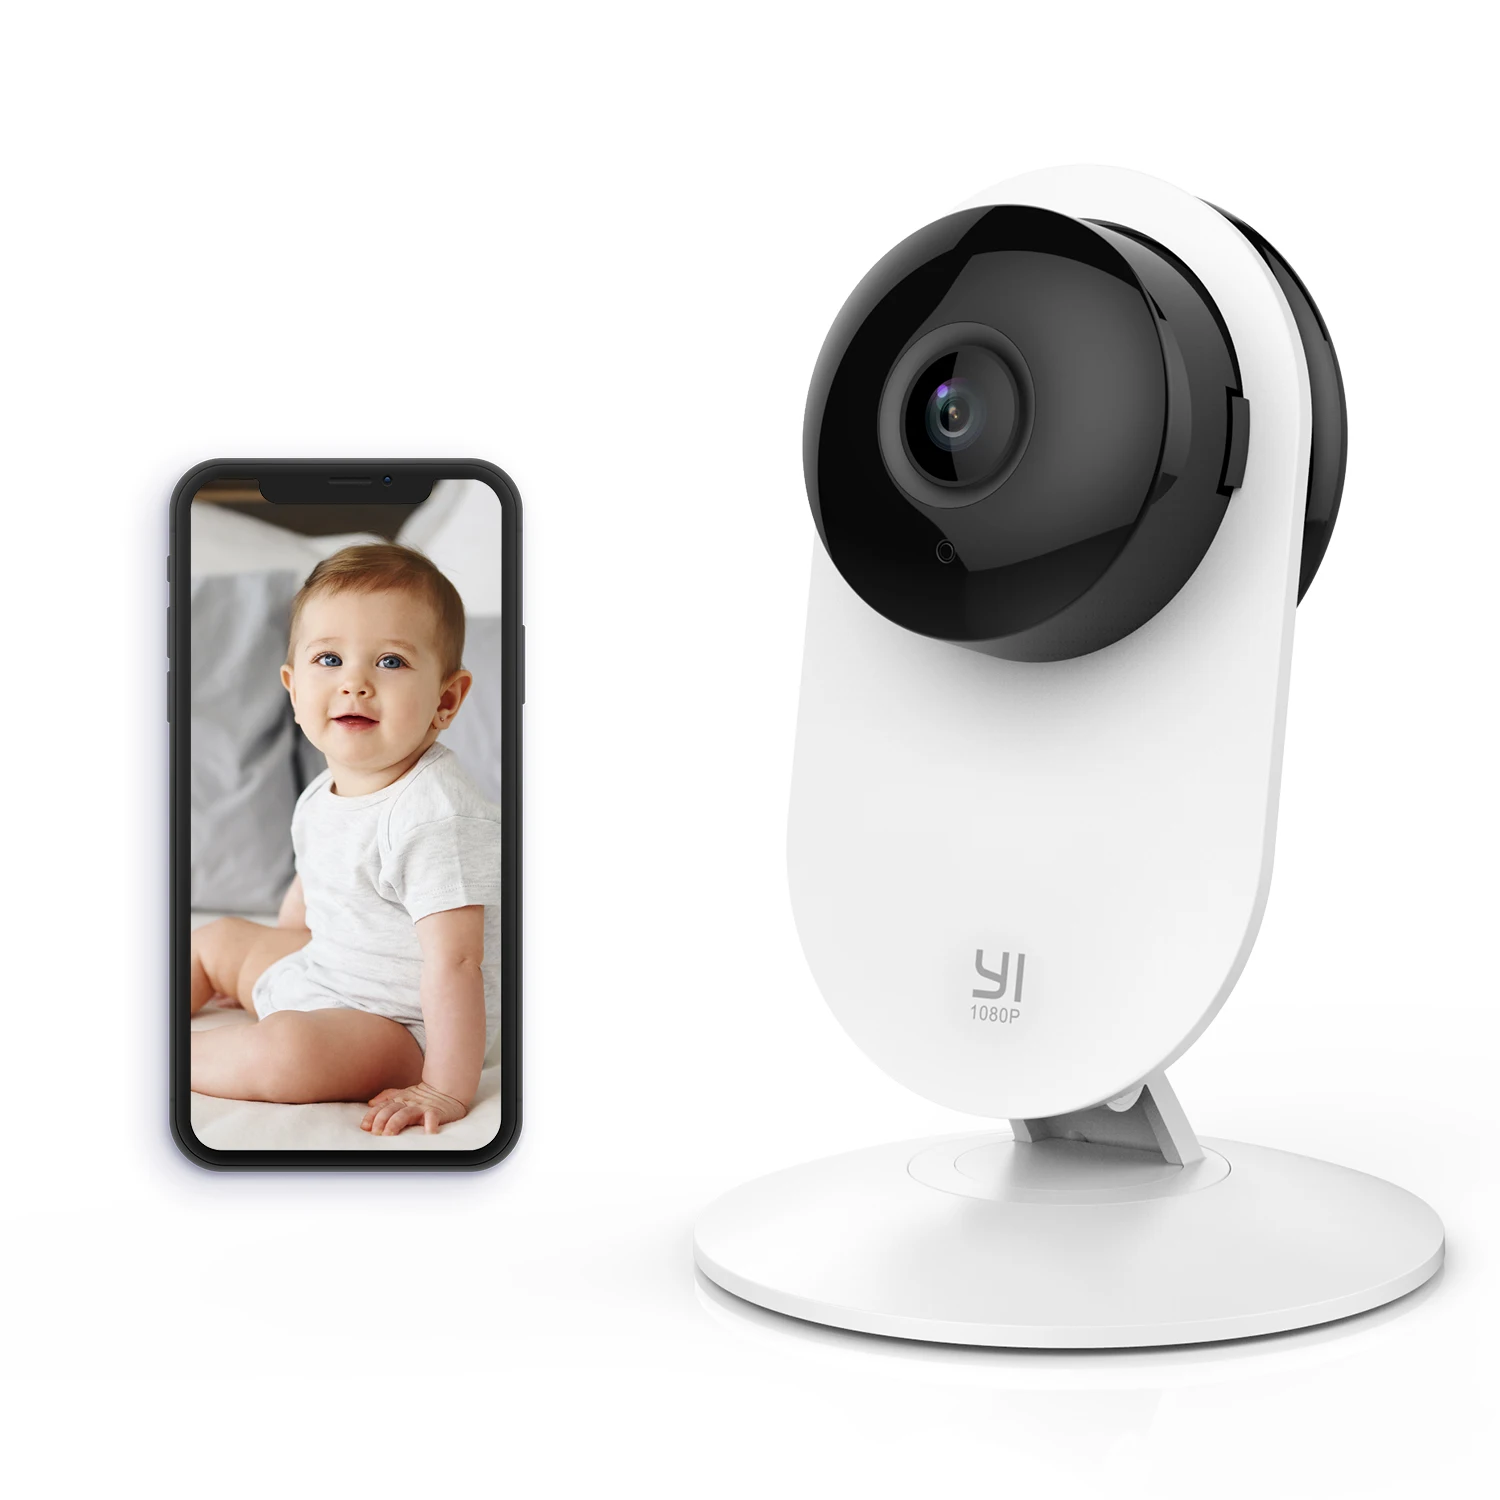 YI Home Camera 1080P HD AI Based Smart Home Camera Security Wireless IP Cam Night Vision Office EU Version Android YI Cloud|Surveillance Cameras| - AliExpress